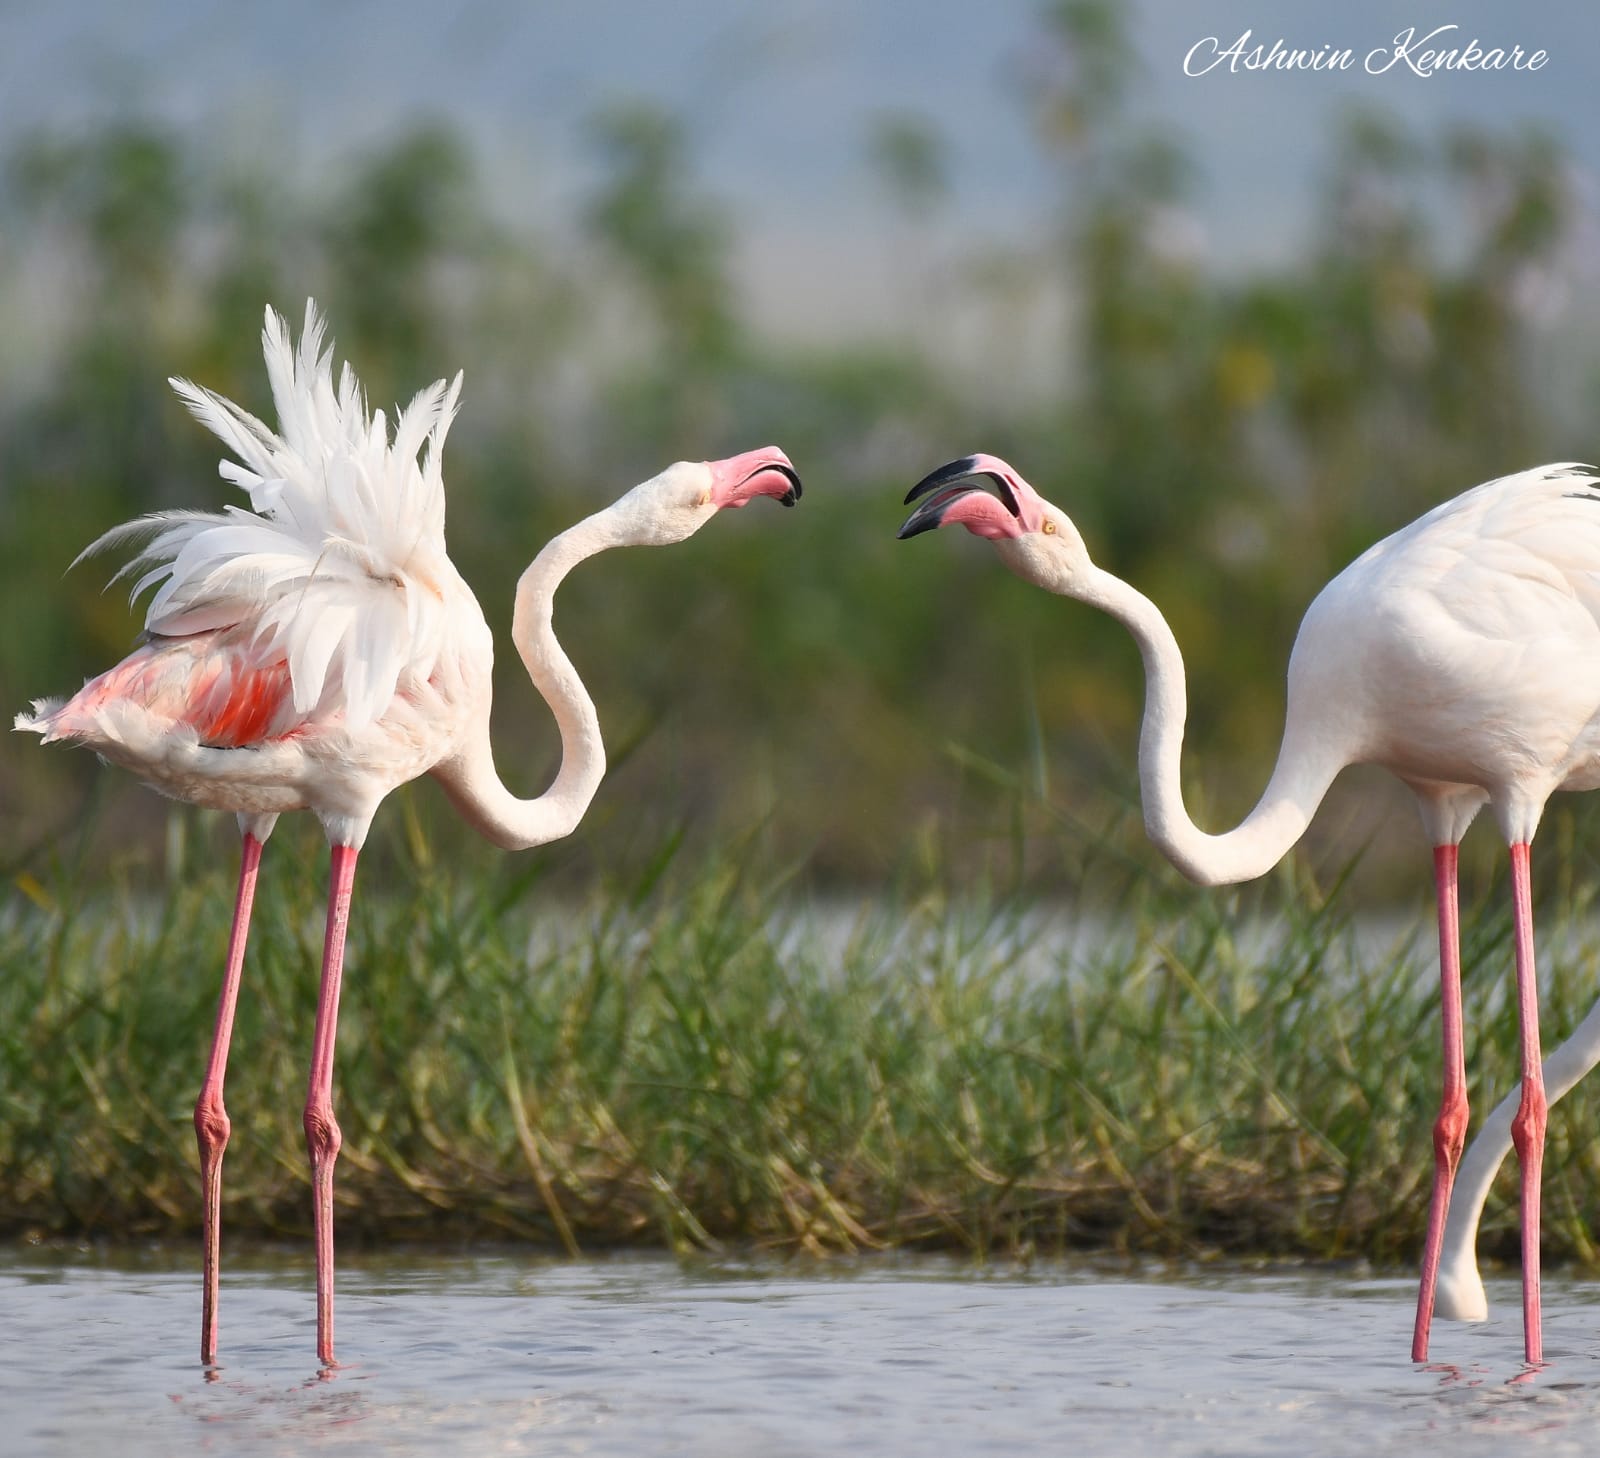 Valentine's Day 2022: Picture shows two flamingos looking at each other.  (Ashwin Kenkare)